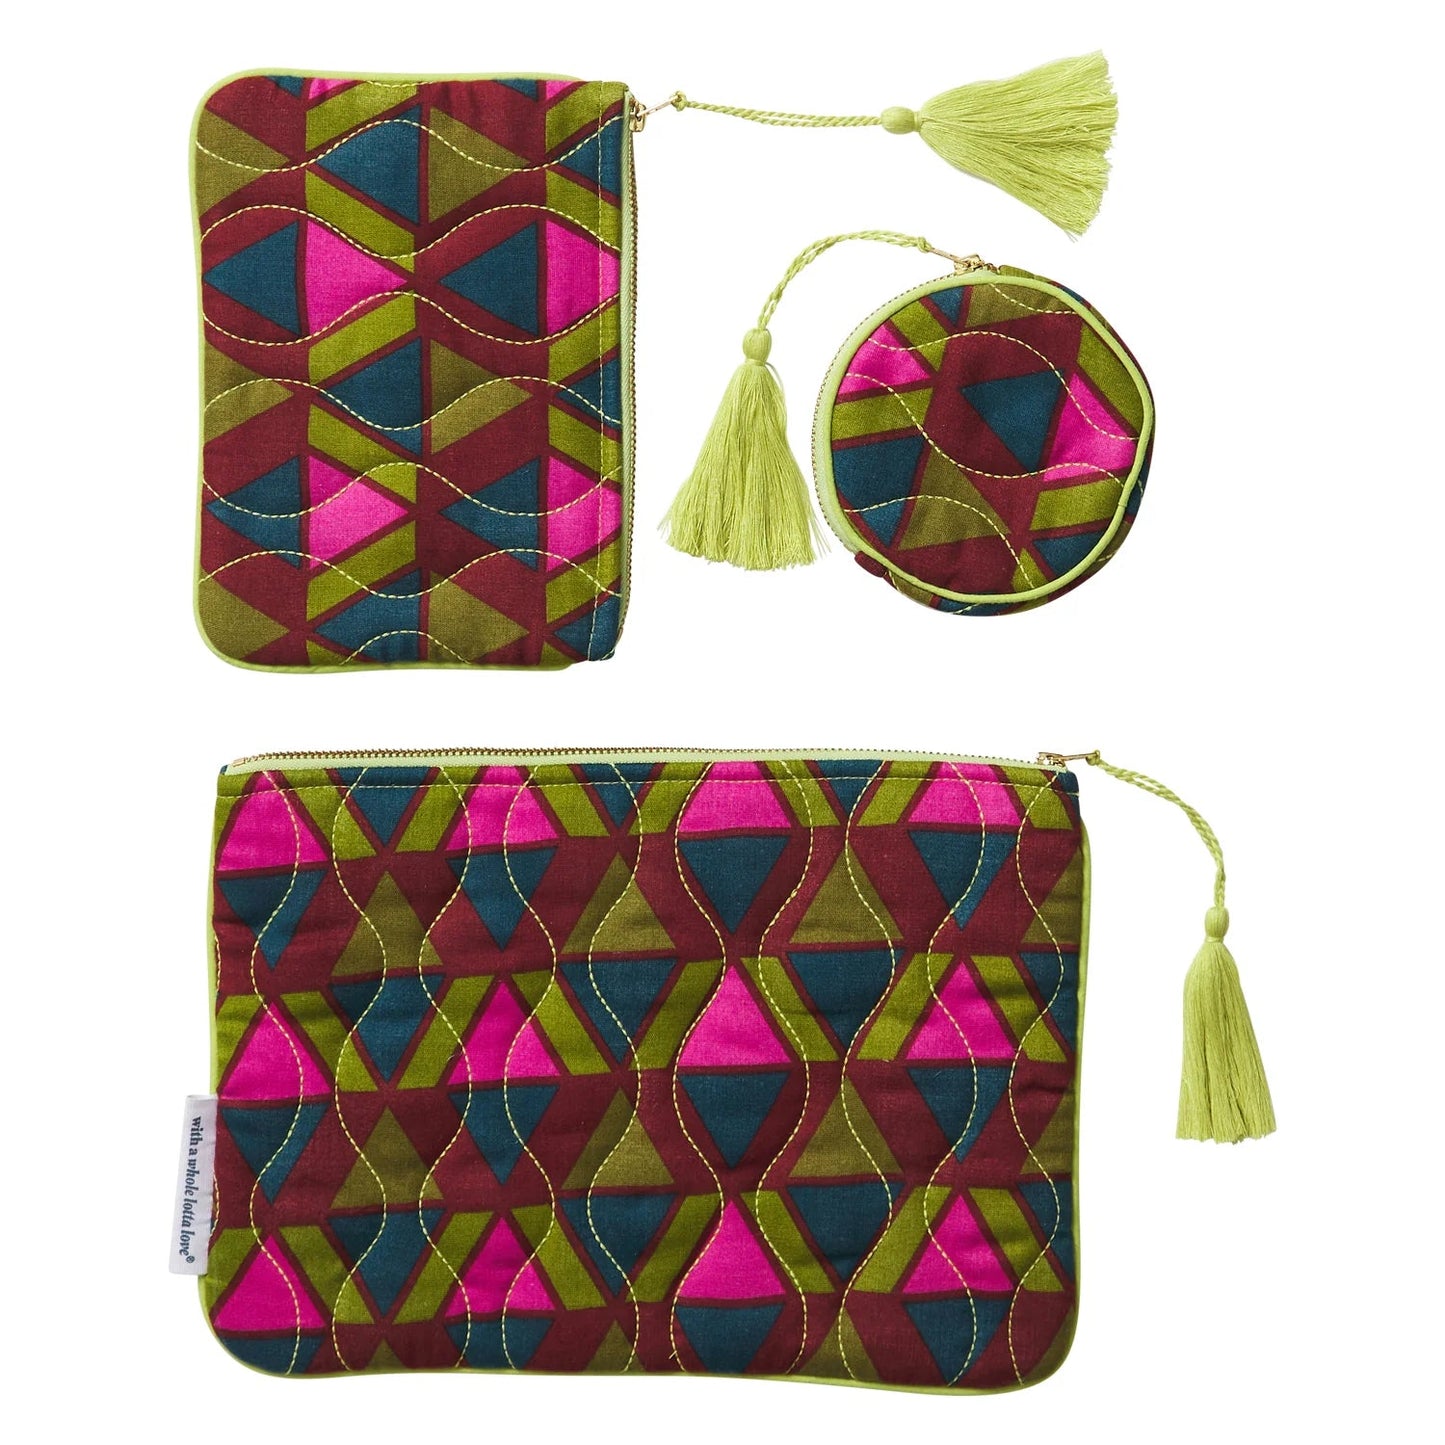 Pirro Pouch Beauty Set